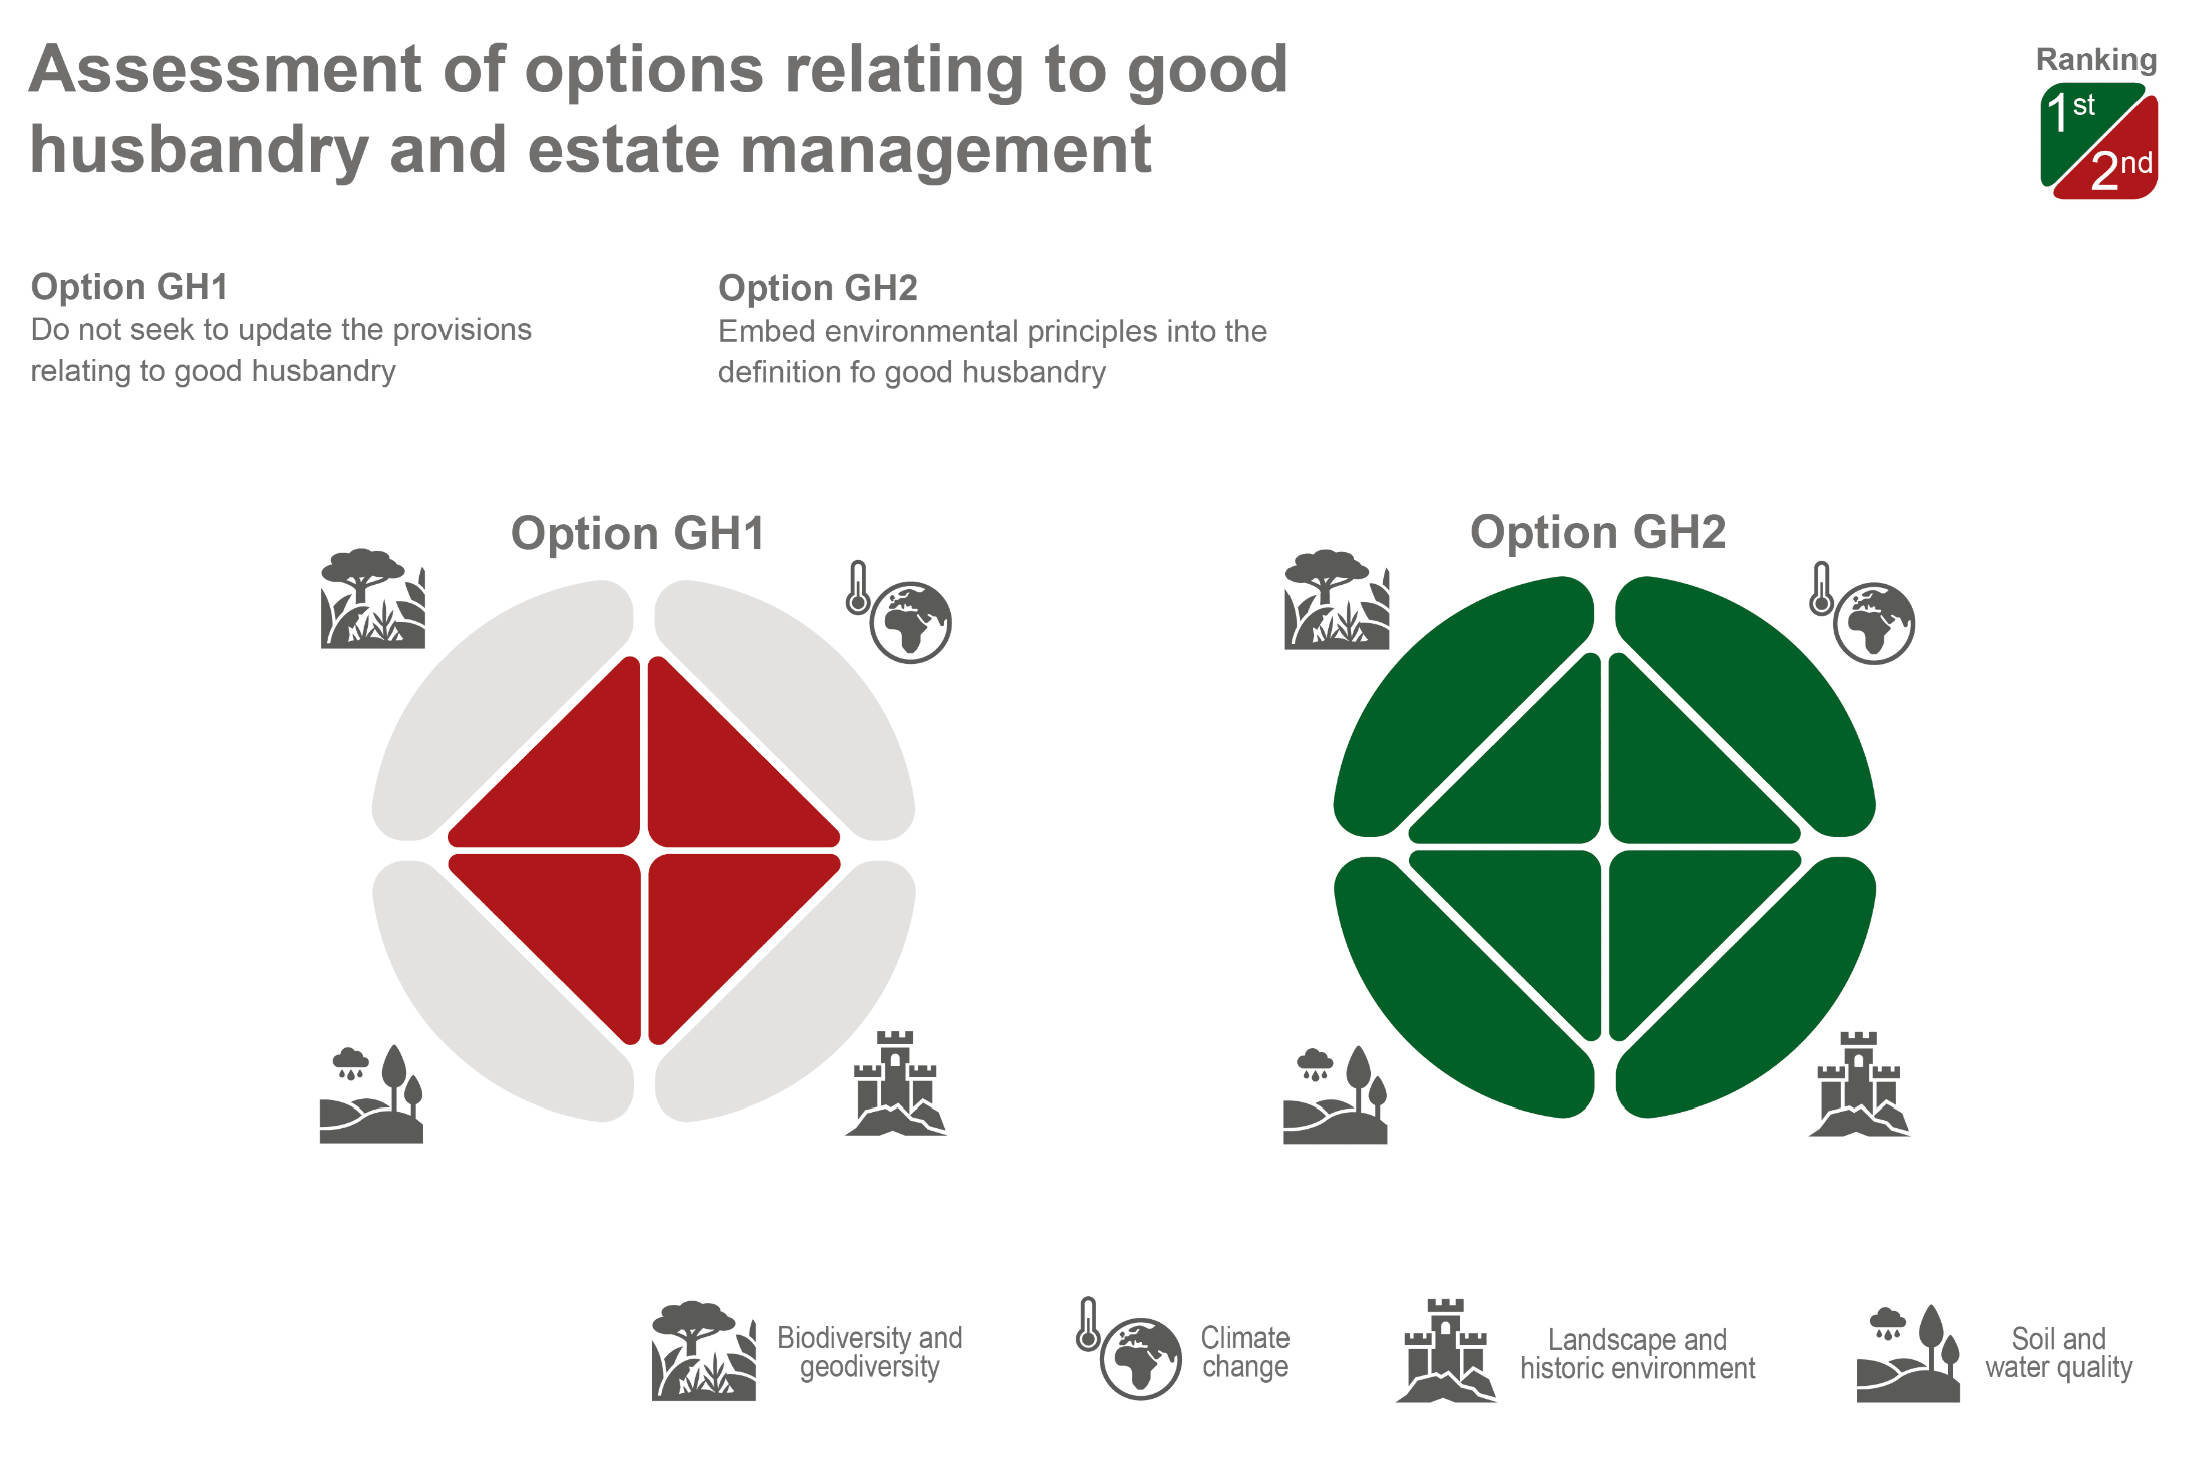 Infographic showing the assessment results of the two options relating to good husbandry and estate management.  Option GH2 performs more favourably than Option GH1 across all four SEA topics.